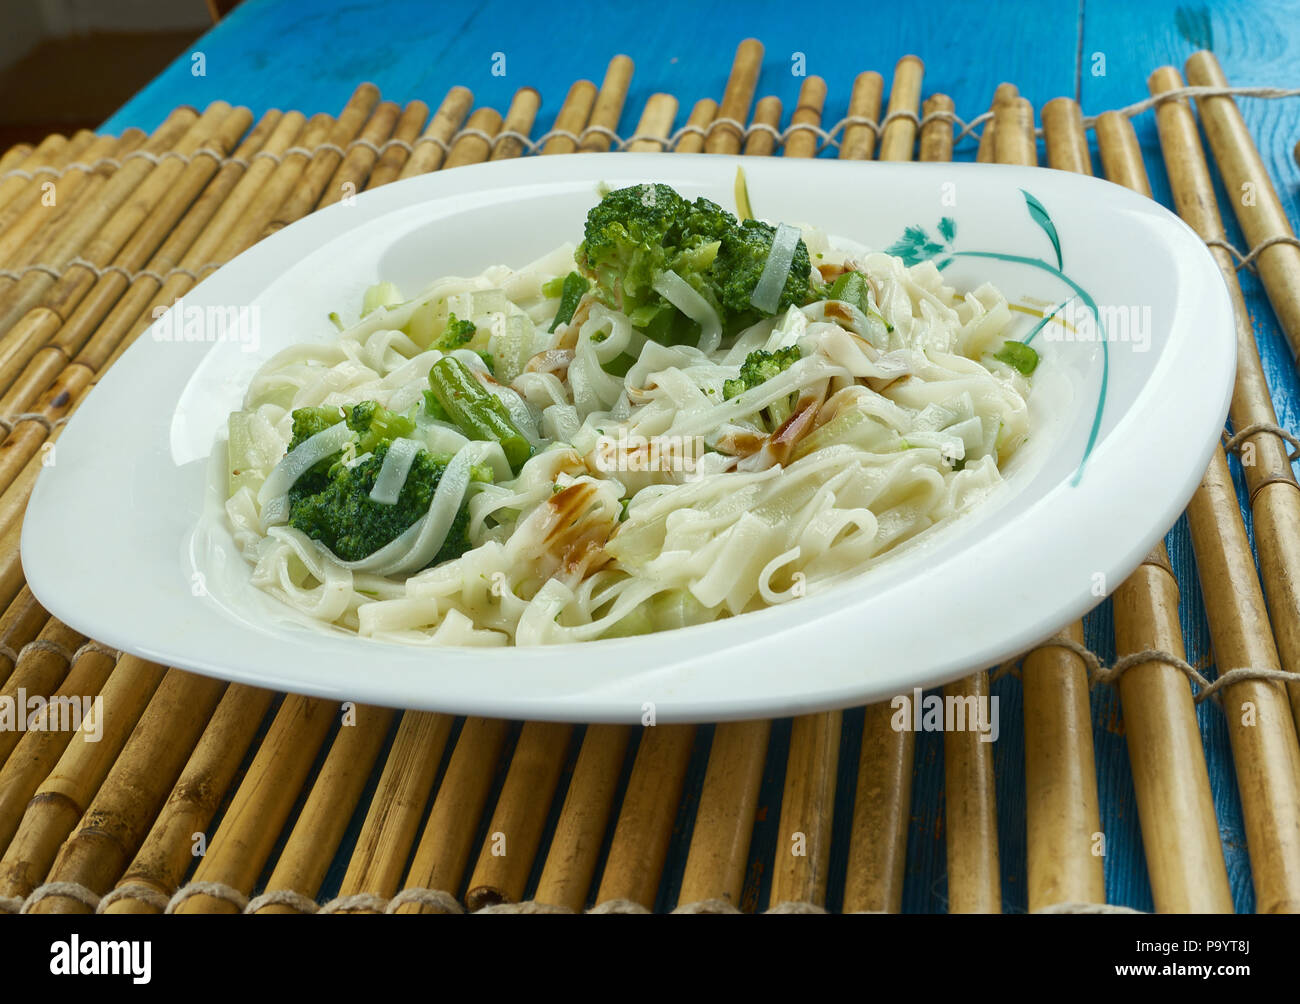 Chowmein - traditional Chinese  stir-fried noodles.  popular on Chinese-American restaurant menus. Stock Photo